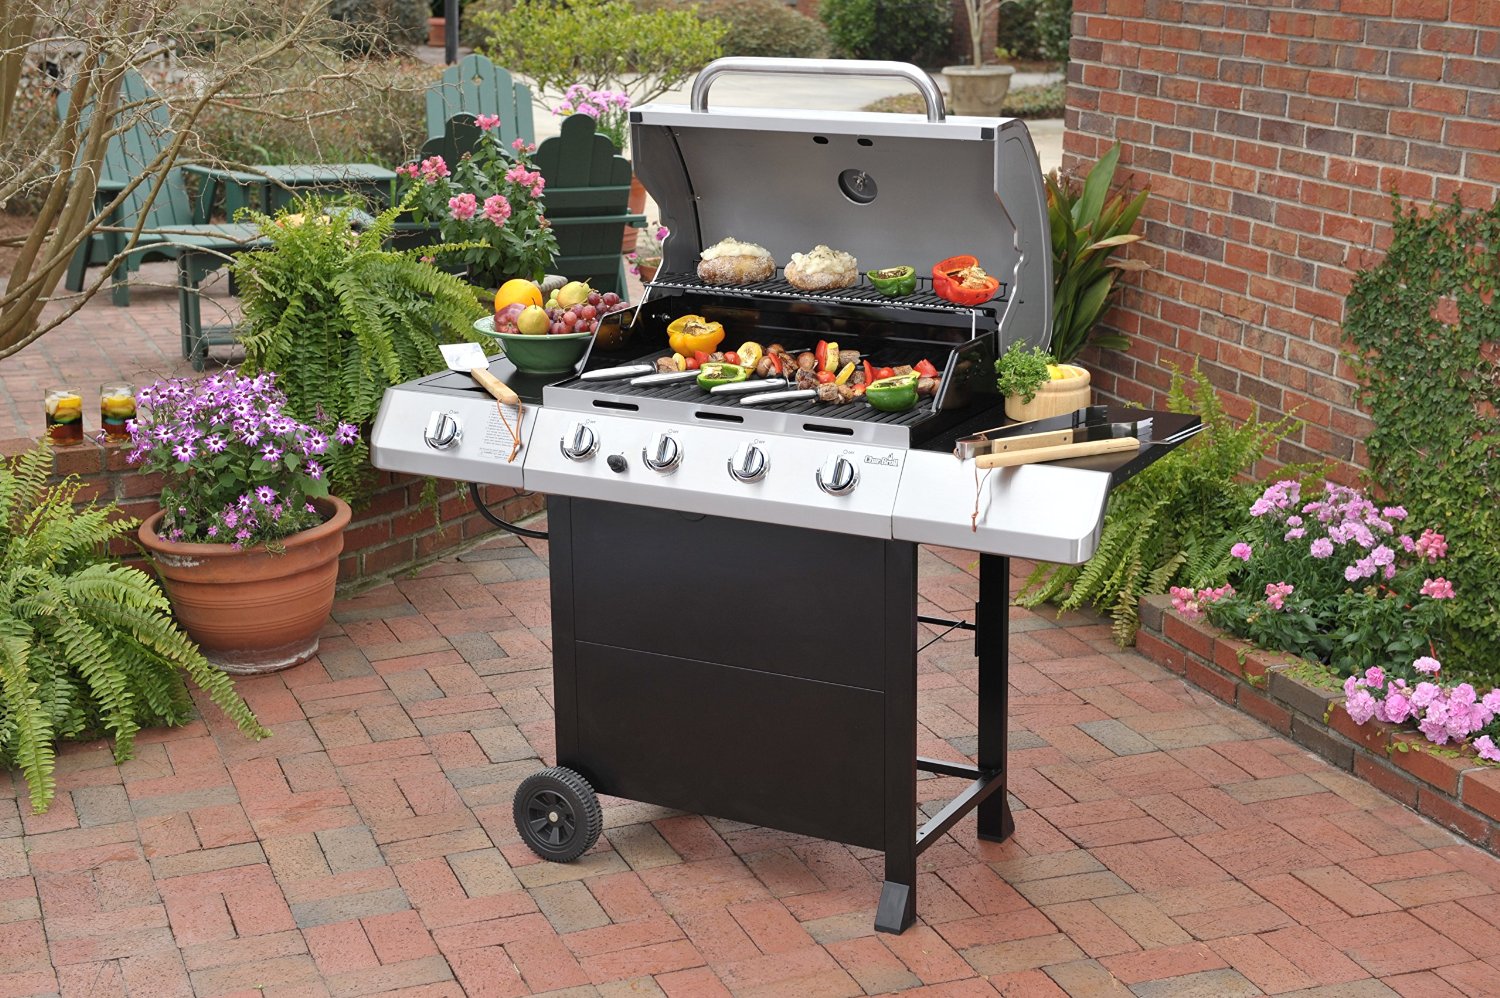 Char-Broil Vertical 45 Inch Liquid Propane Outdoor Steel Grill Gas